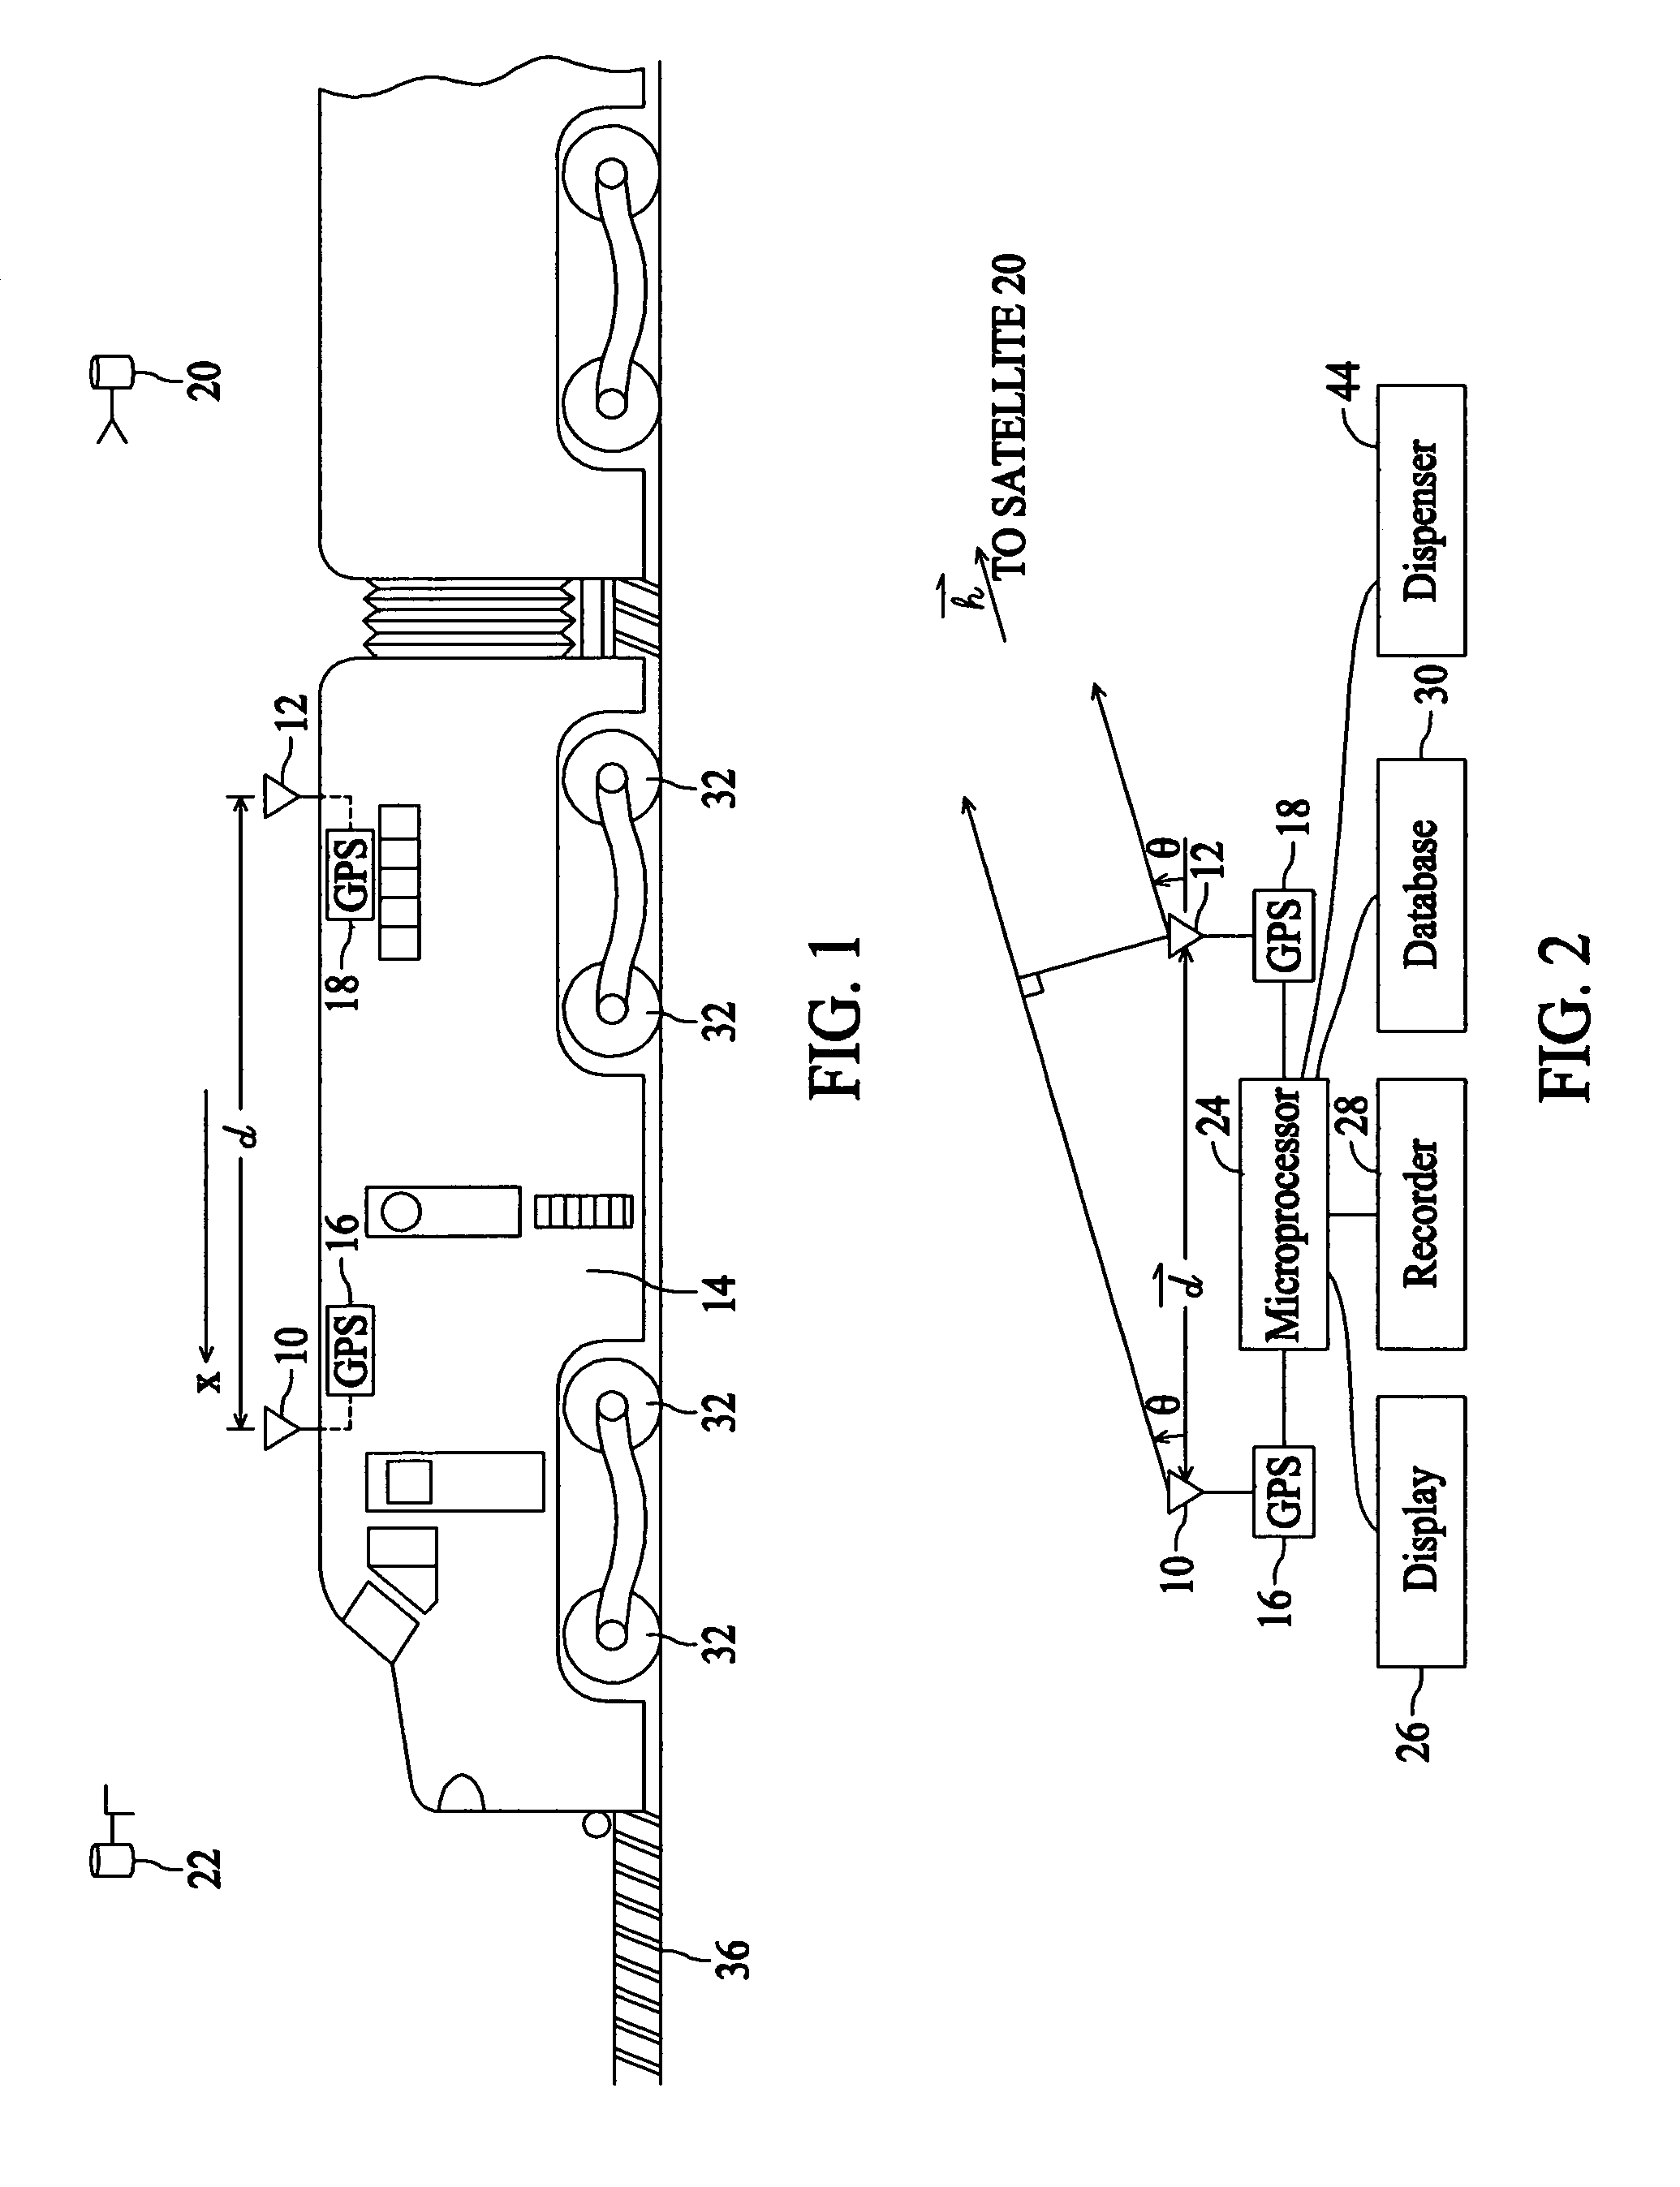 Methods and apparatus for measuring navigational parameters of a locomotive